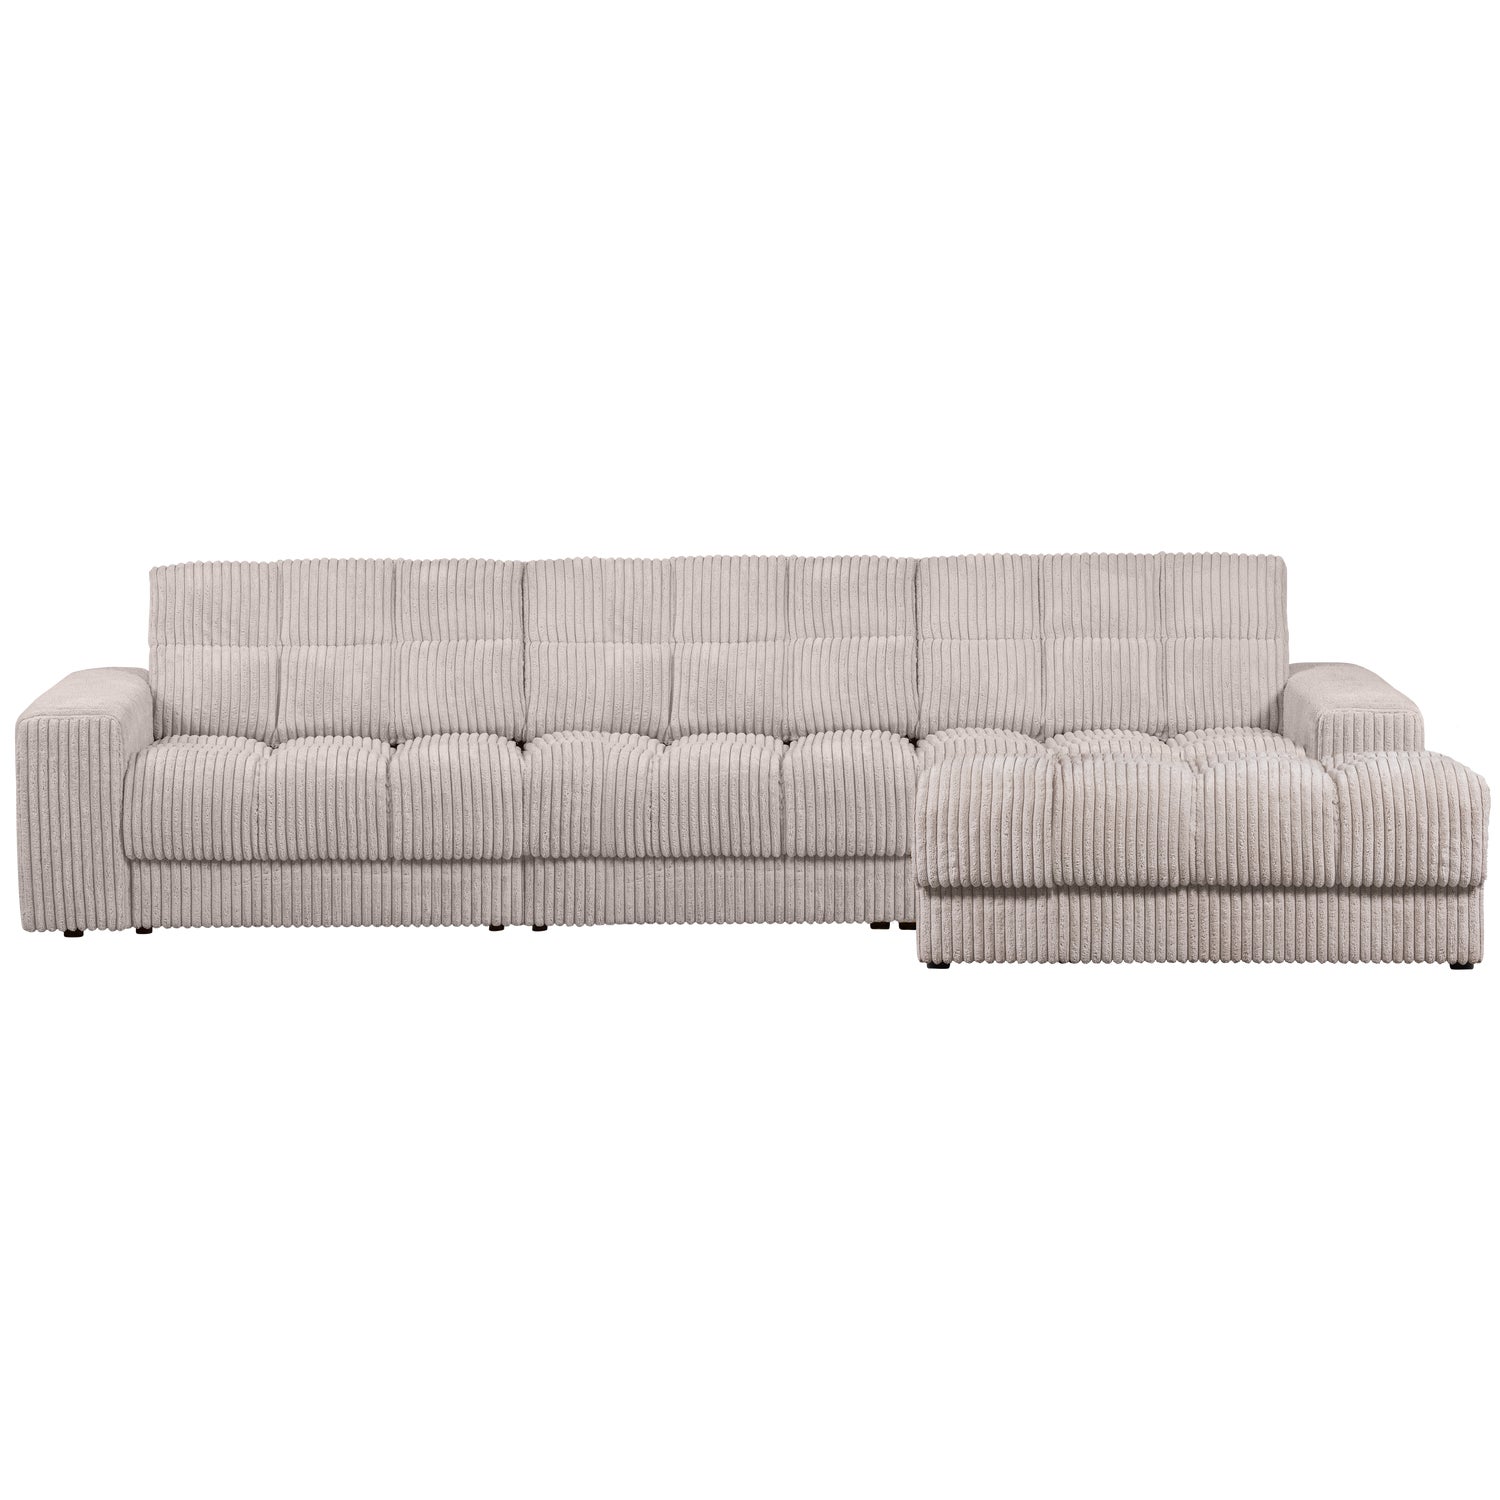 379013-RN-01_VS_WE_Second_date_chaise_longue_rechts_grove_rinstof_naturel.png?auto=webp&format=png&width=1500&height=1500